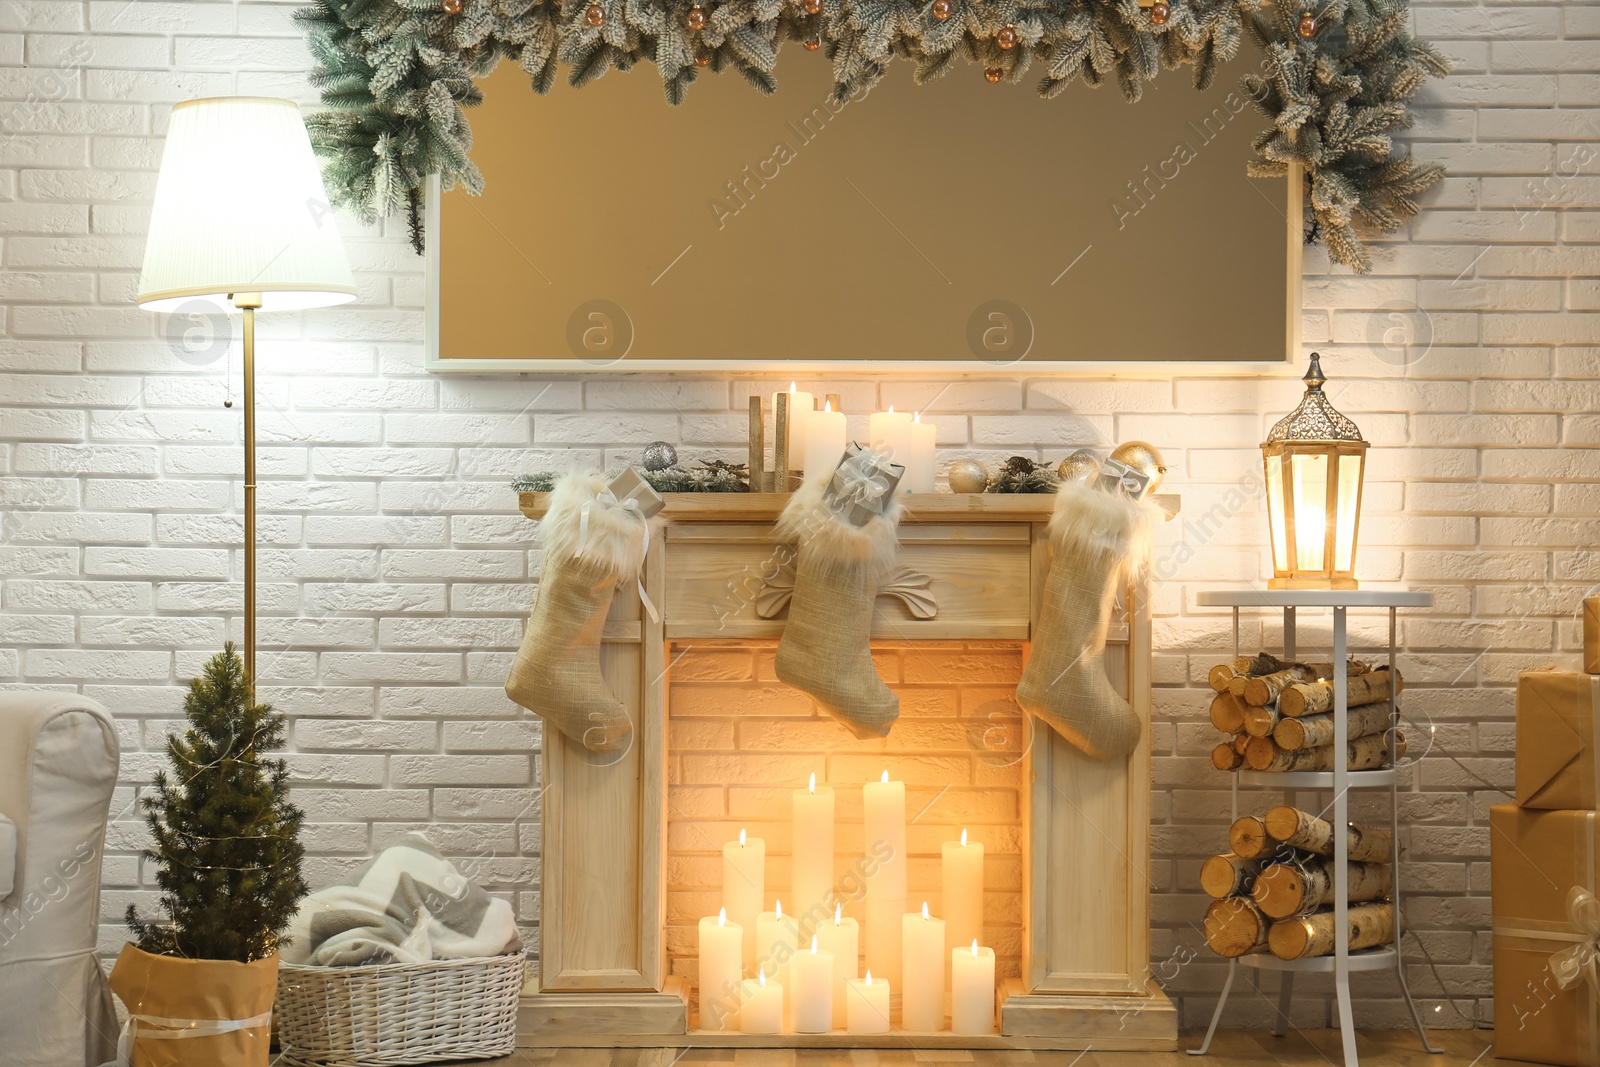 Photo of Room interior with mirror over fireplace decorated for Christmas